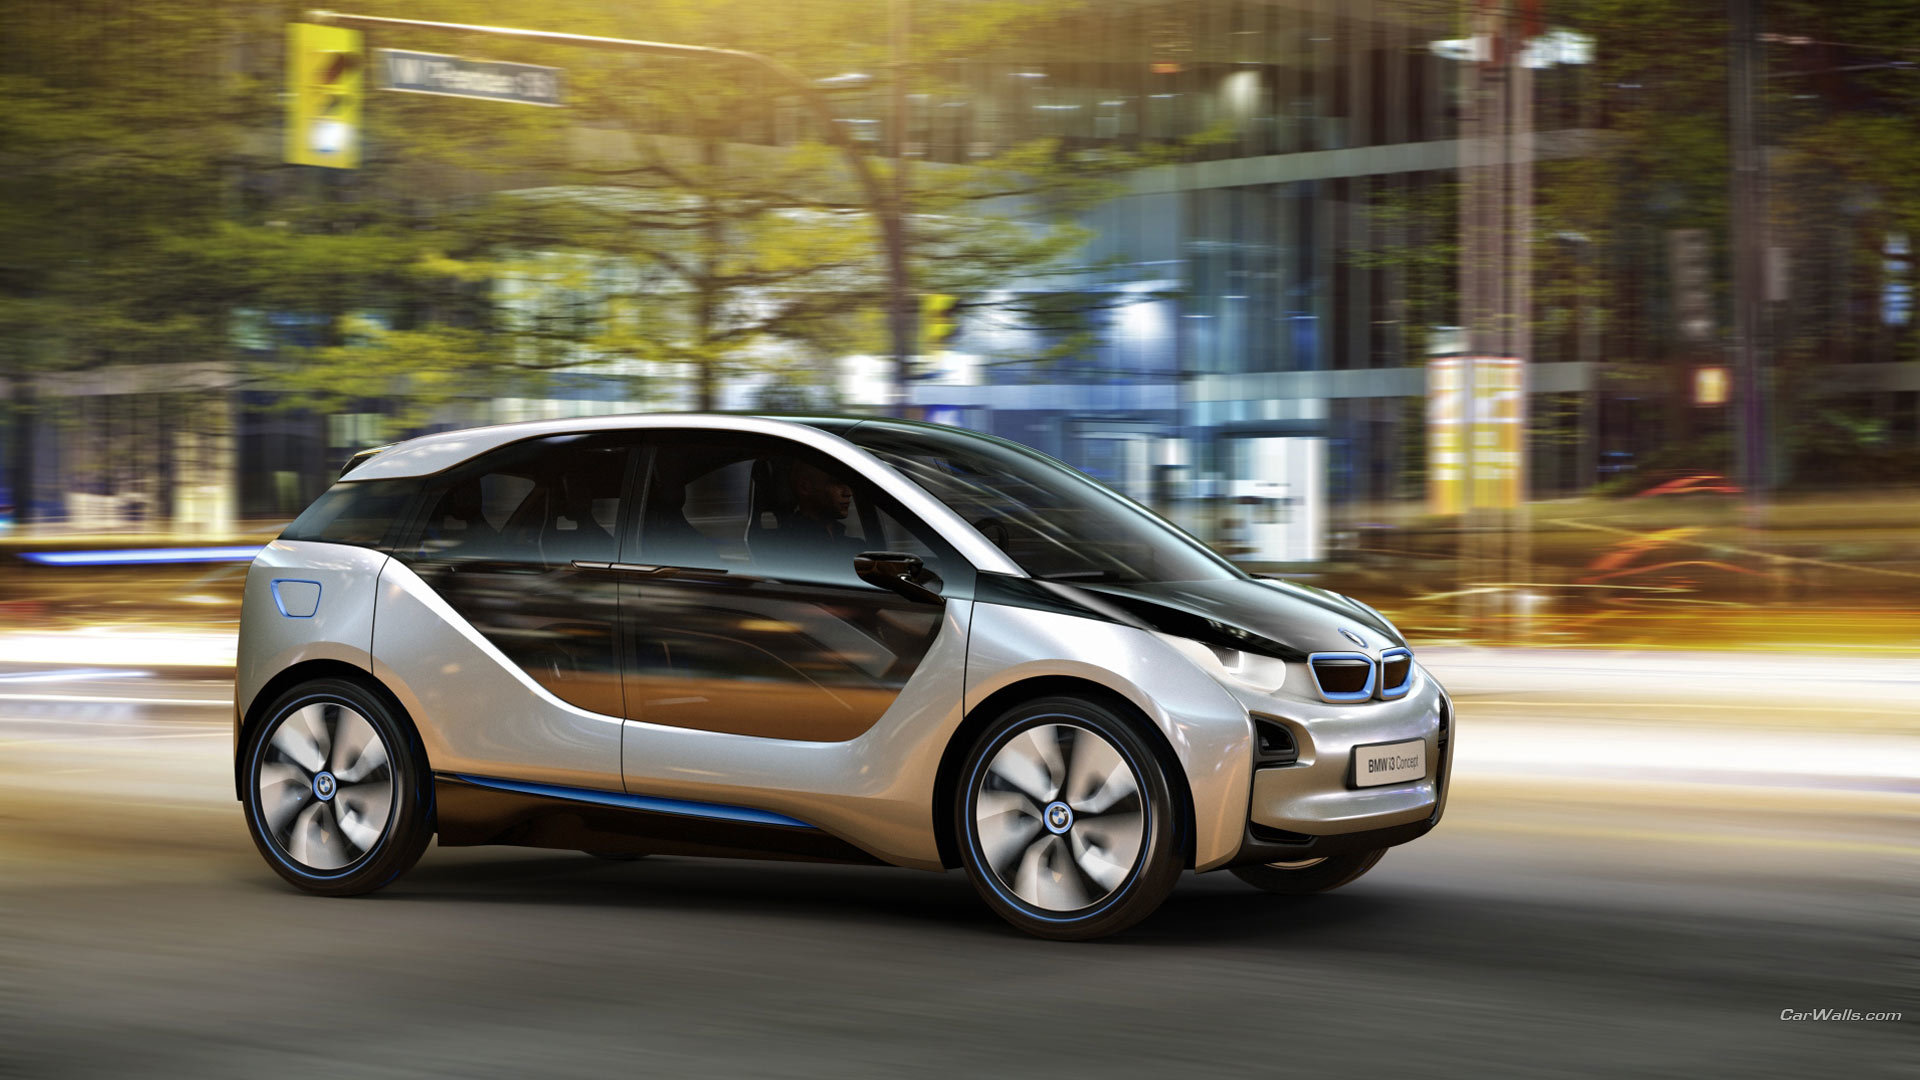 Best BMW I3 Concept wallpaper ID:118537 for High Resolution full hd 1080p computer